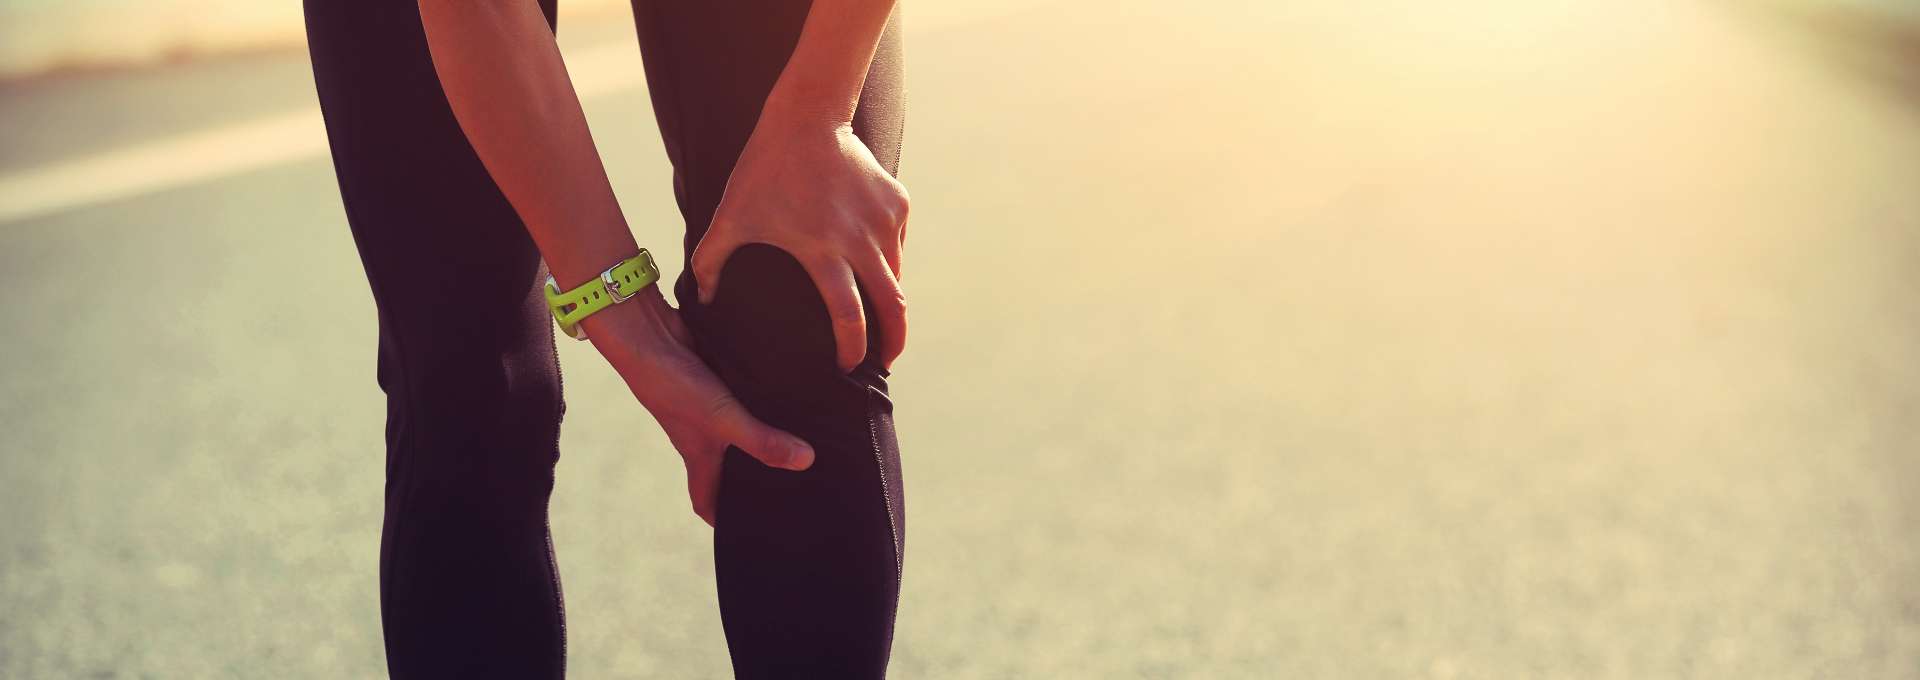 7 injury prevention tips you’ll want to know